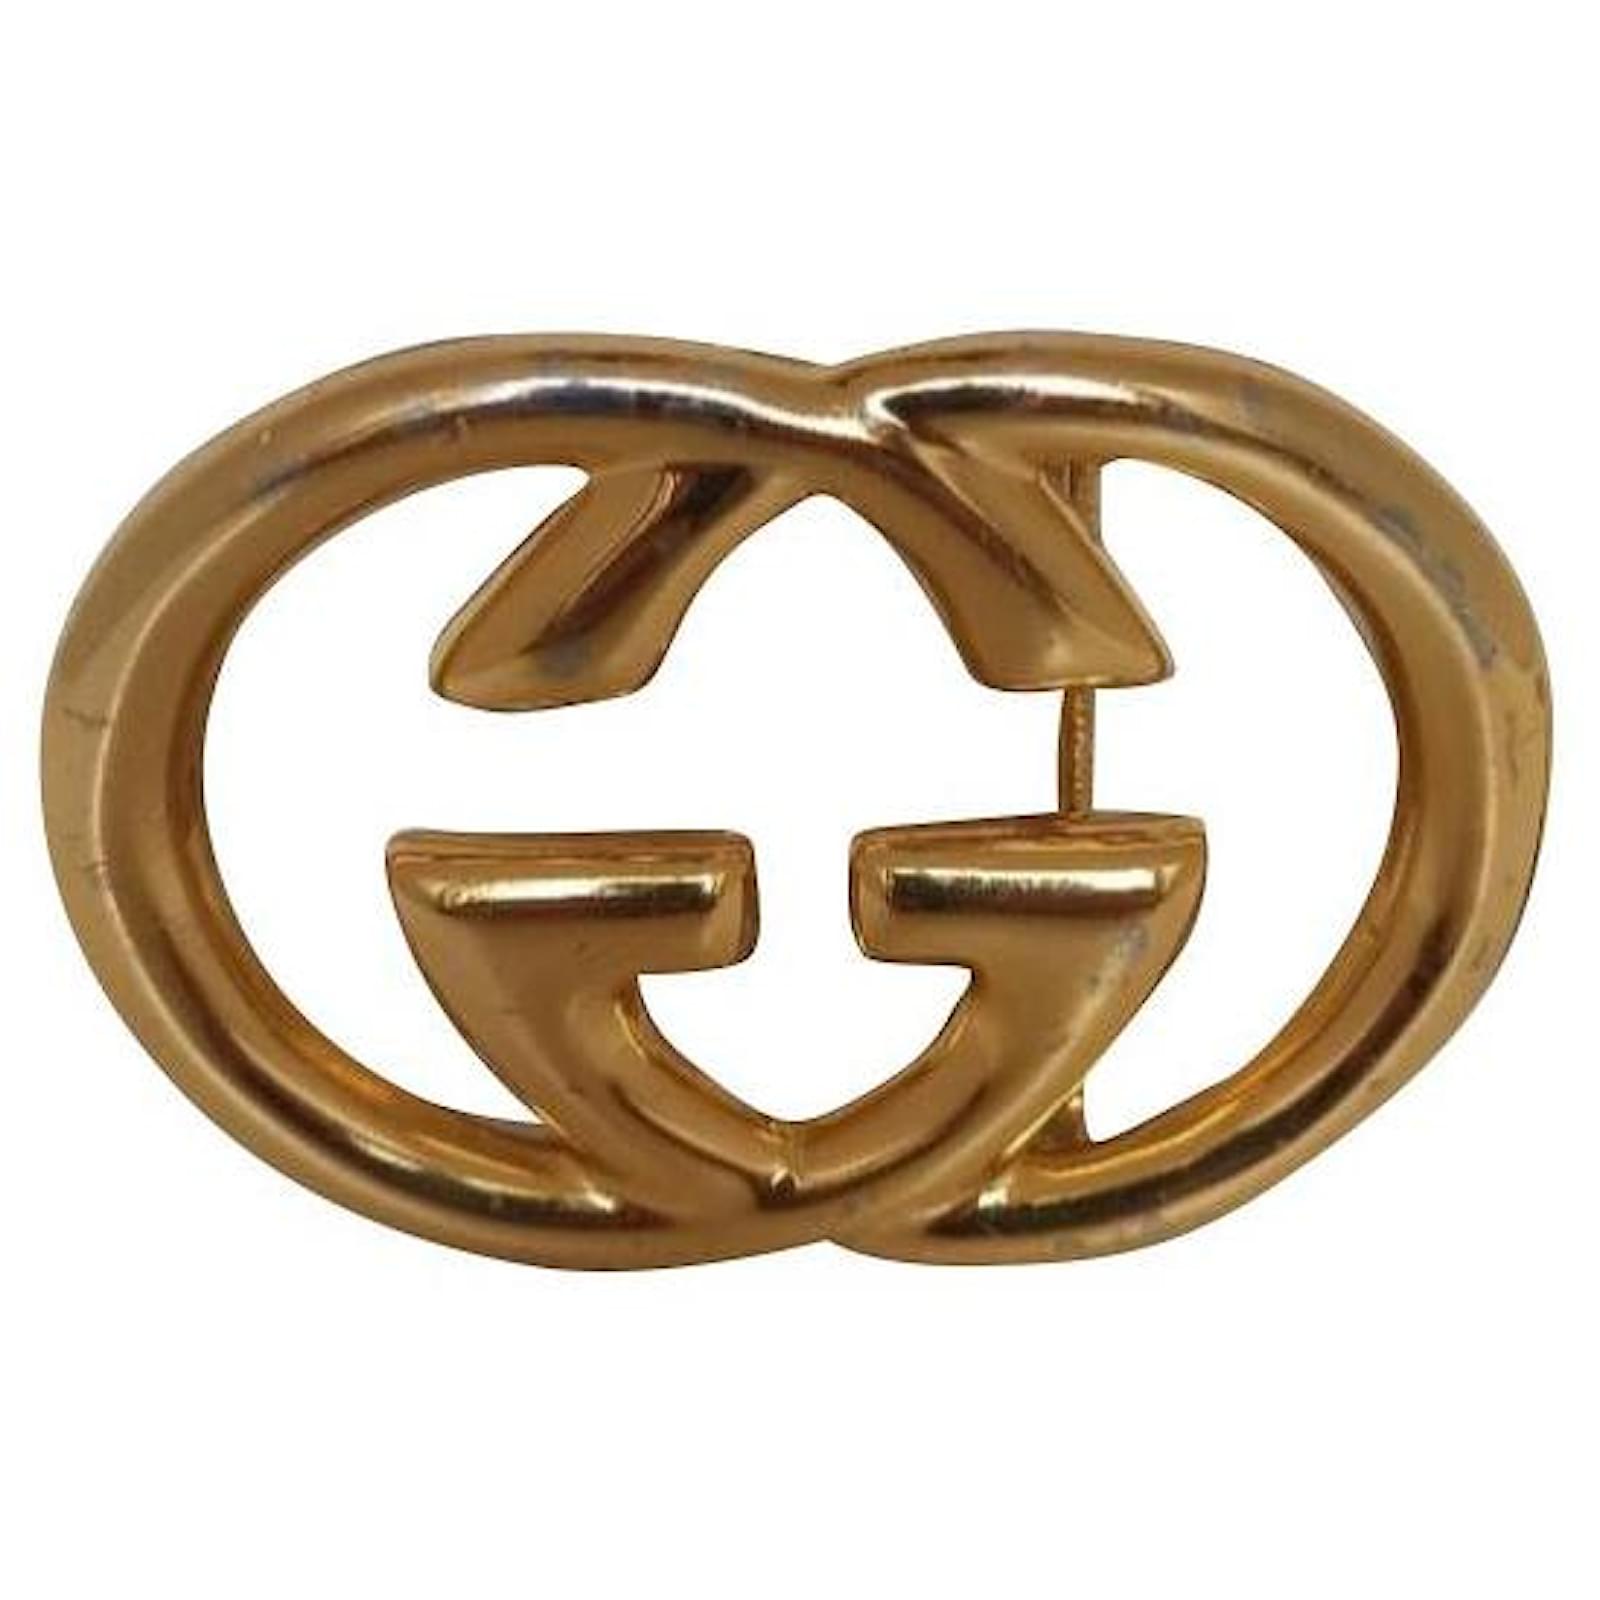 Gucci belt buckle Interlocking Gold Woman Authentic Used Y1697